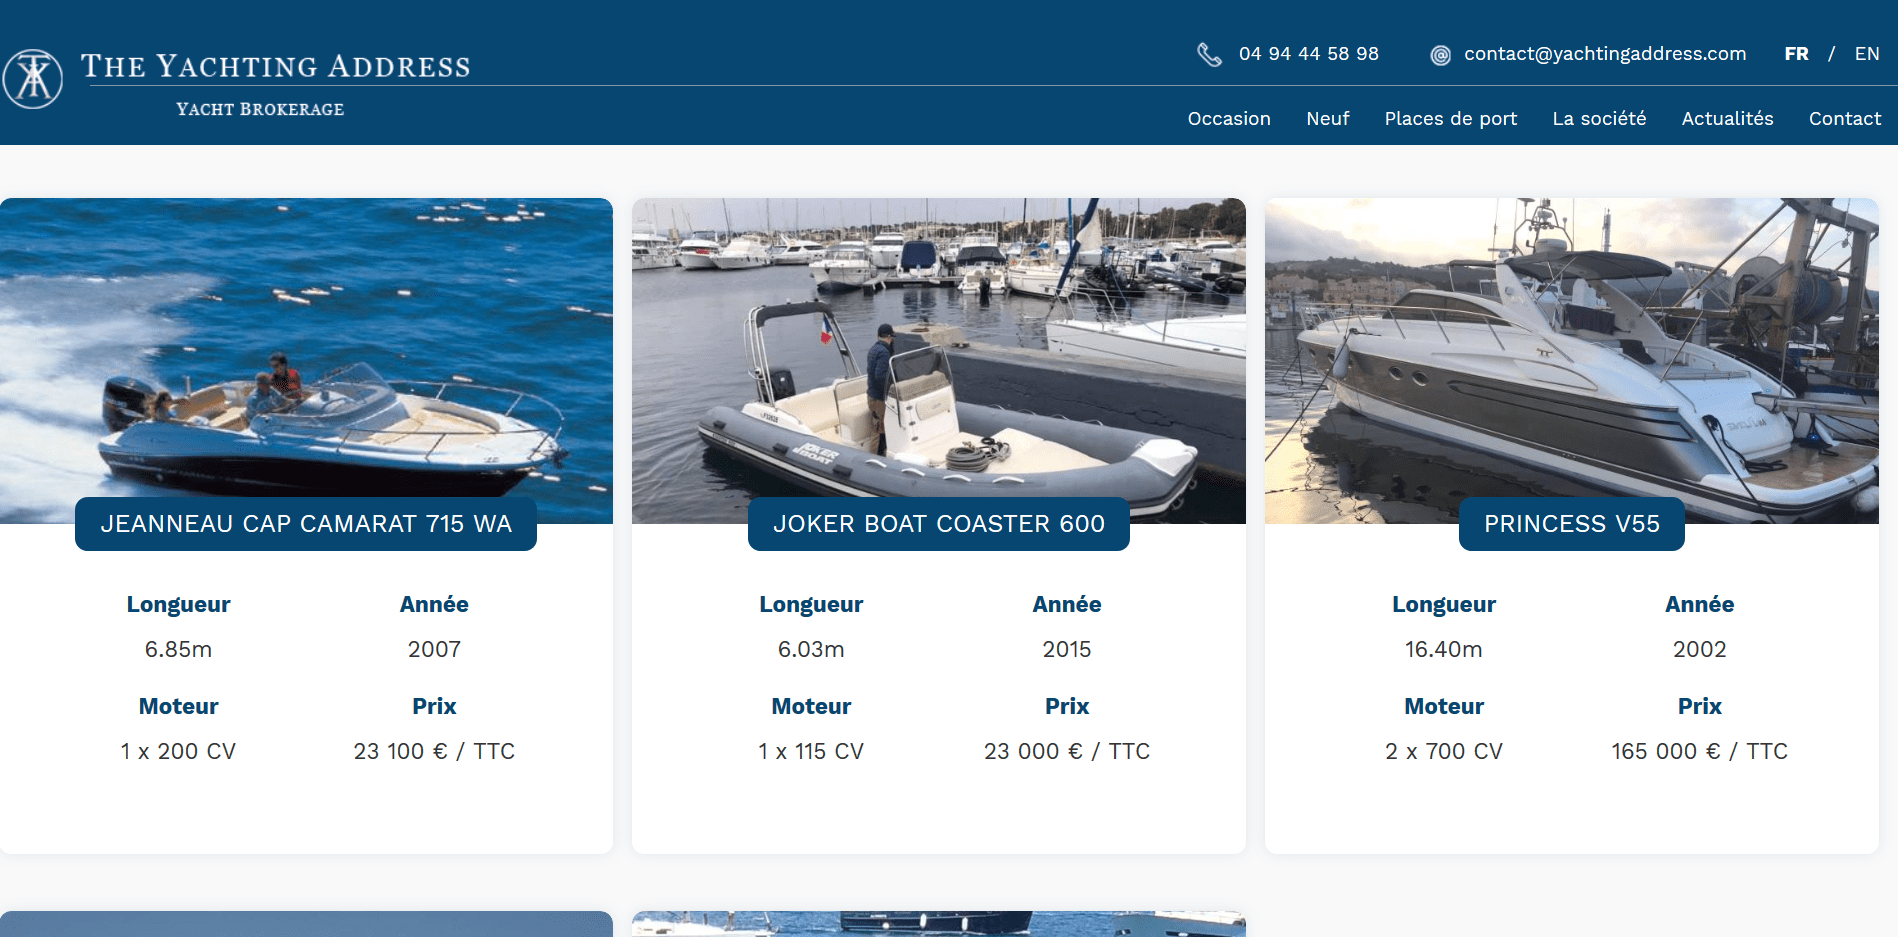 The Yachting Address - LogicielBateau-min.png